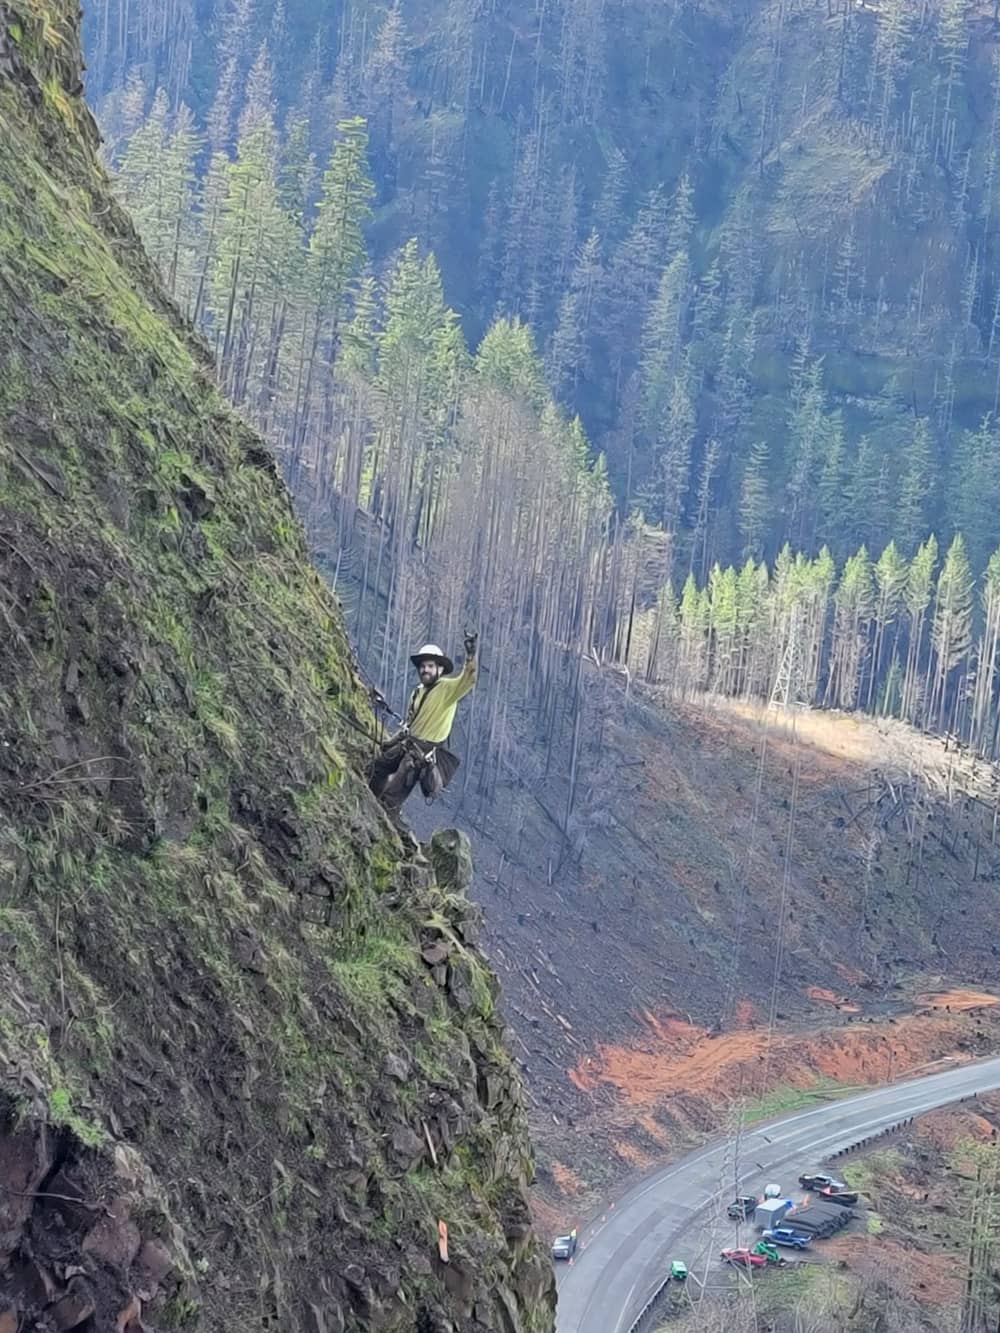 A photo of a trained professional performing rope access work on a road cut near a highway